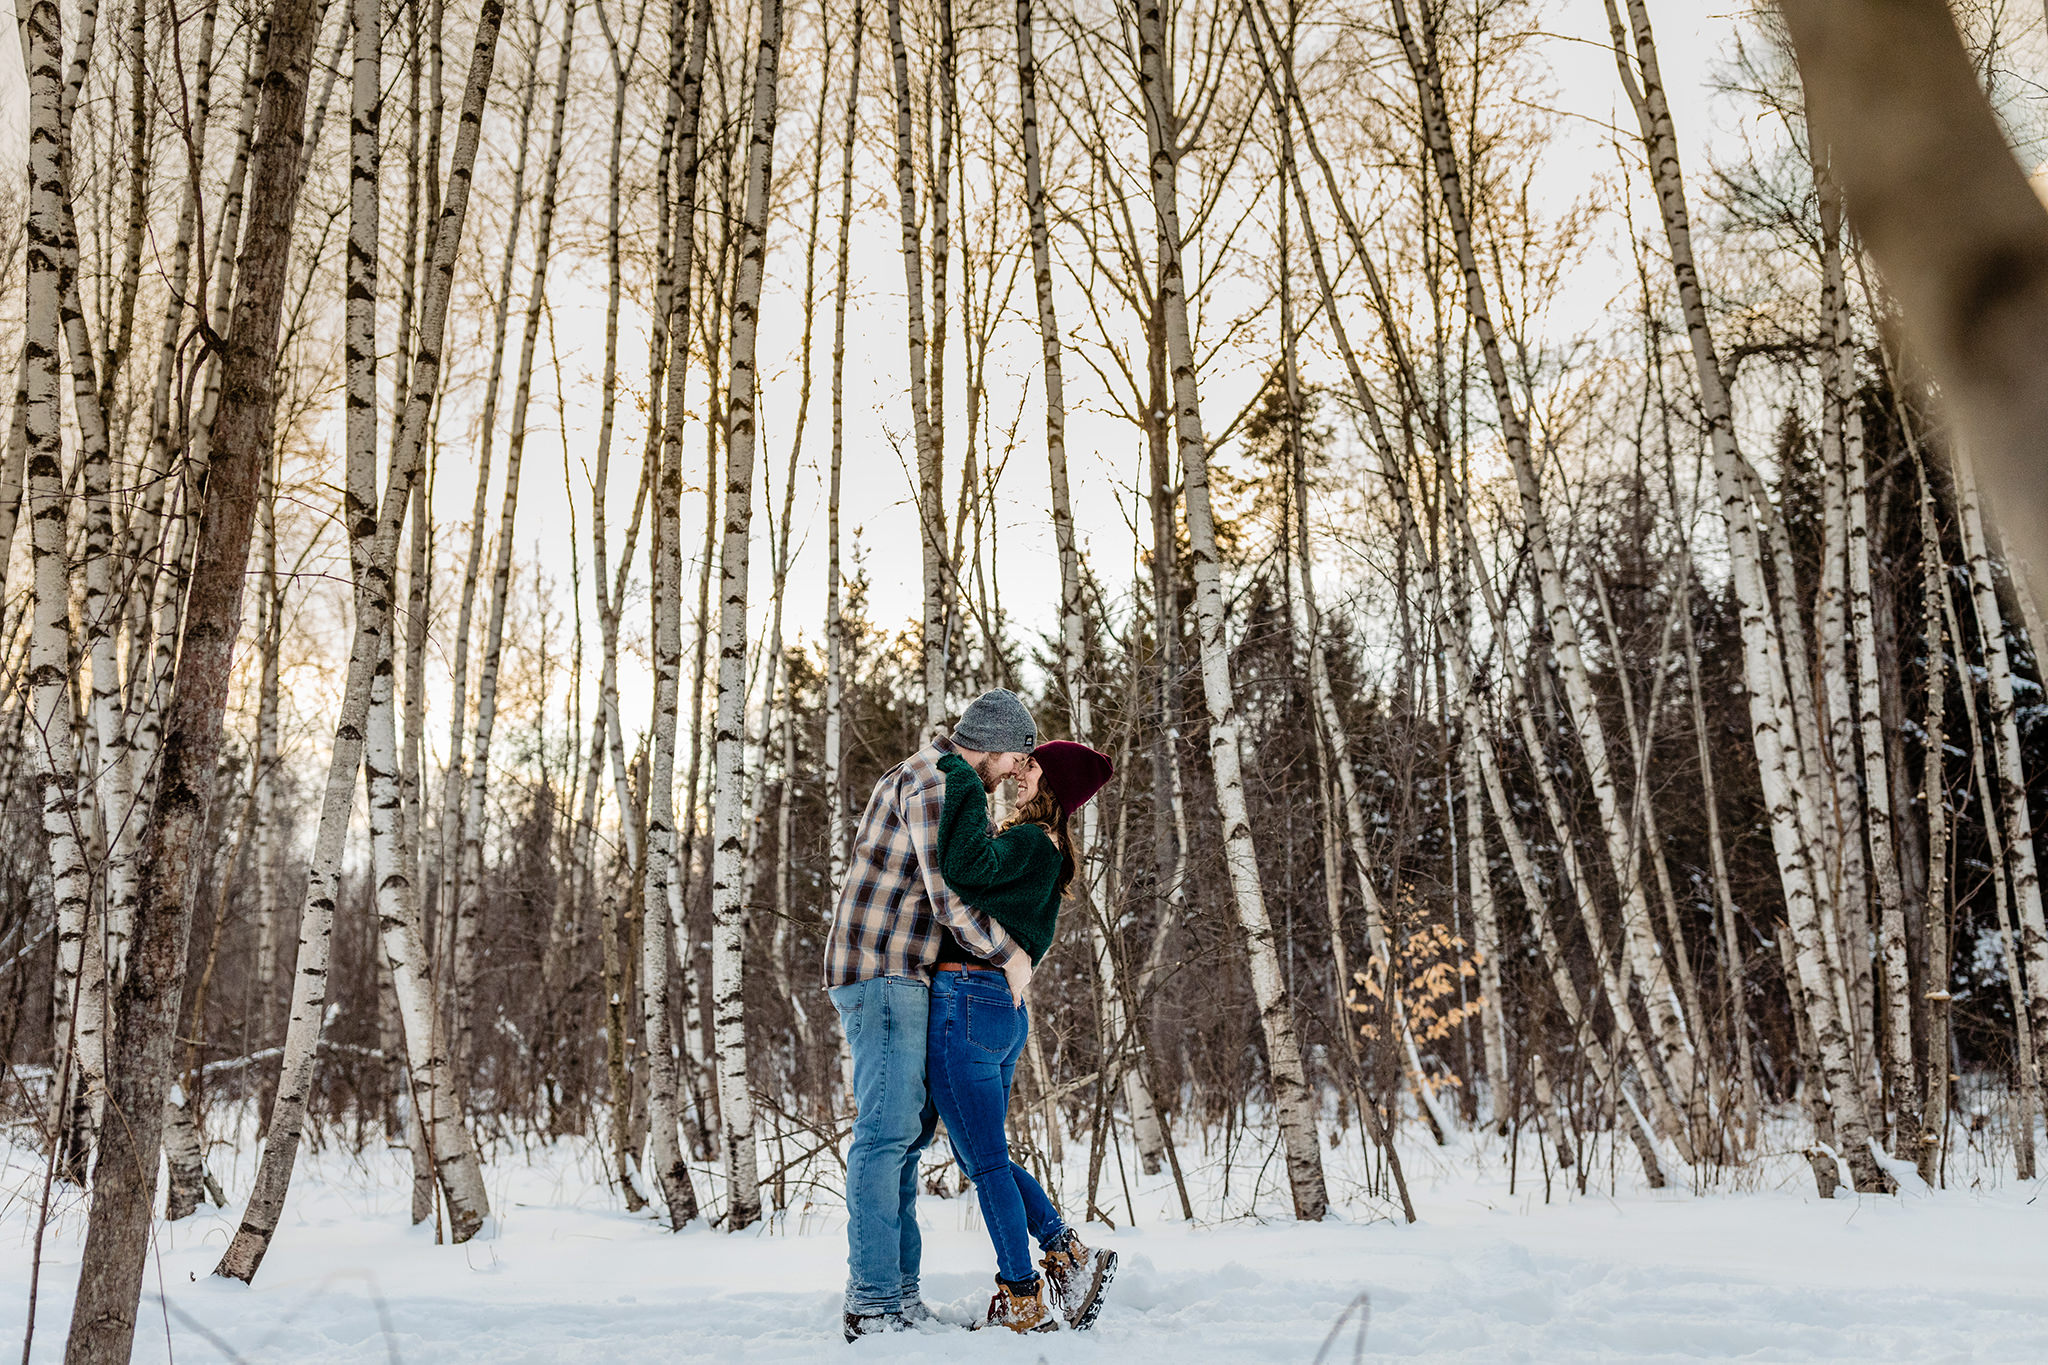 Newly engaged couple smiling and hugging surrounded by trees in a snowy forest.